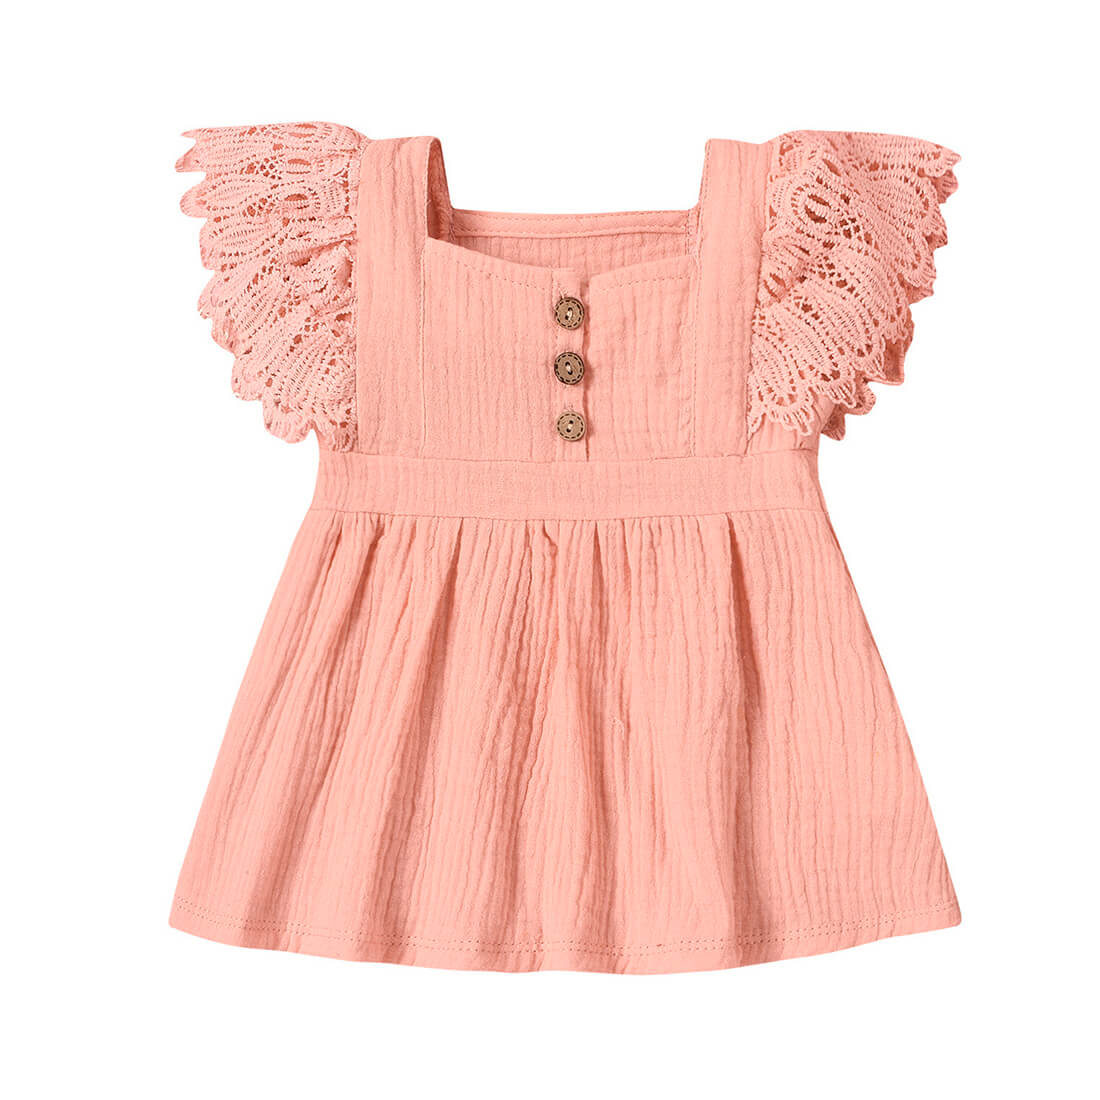 Solid Lace Sleeve Baby Dress Pink 0-3 M 